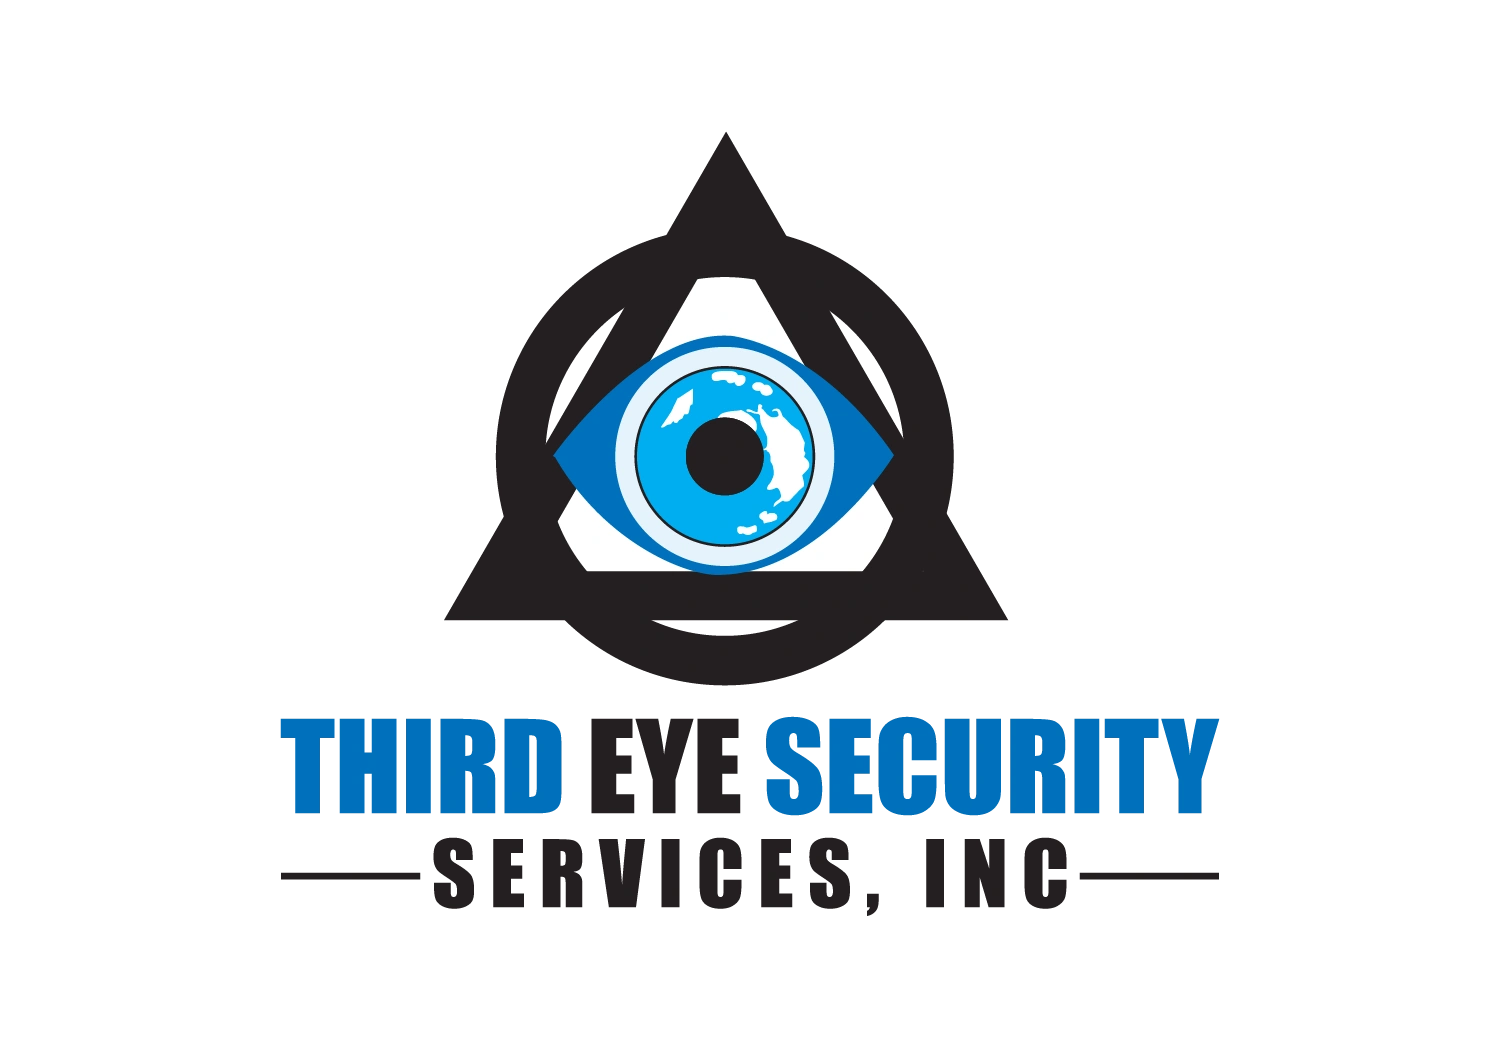 eye on pinpoint security